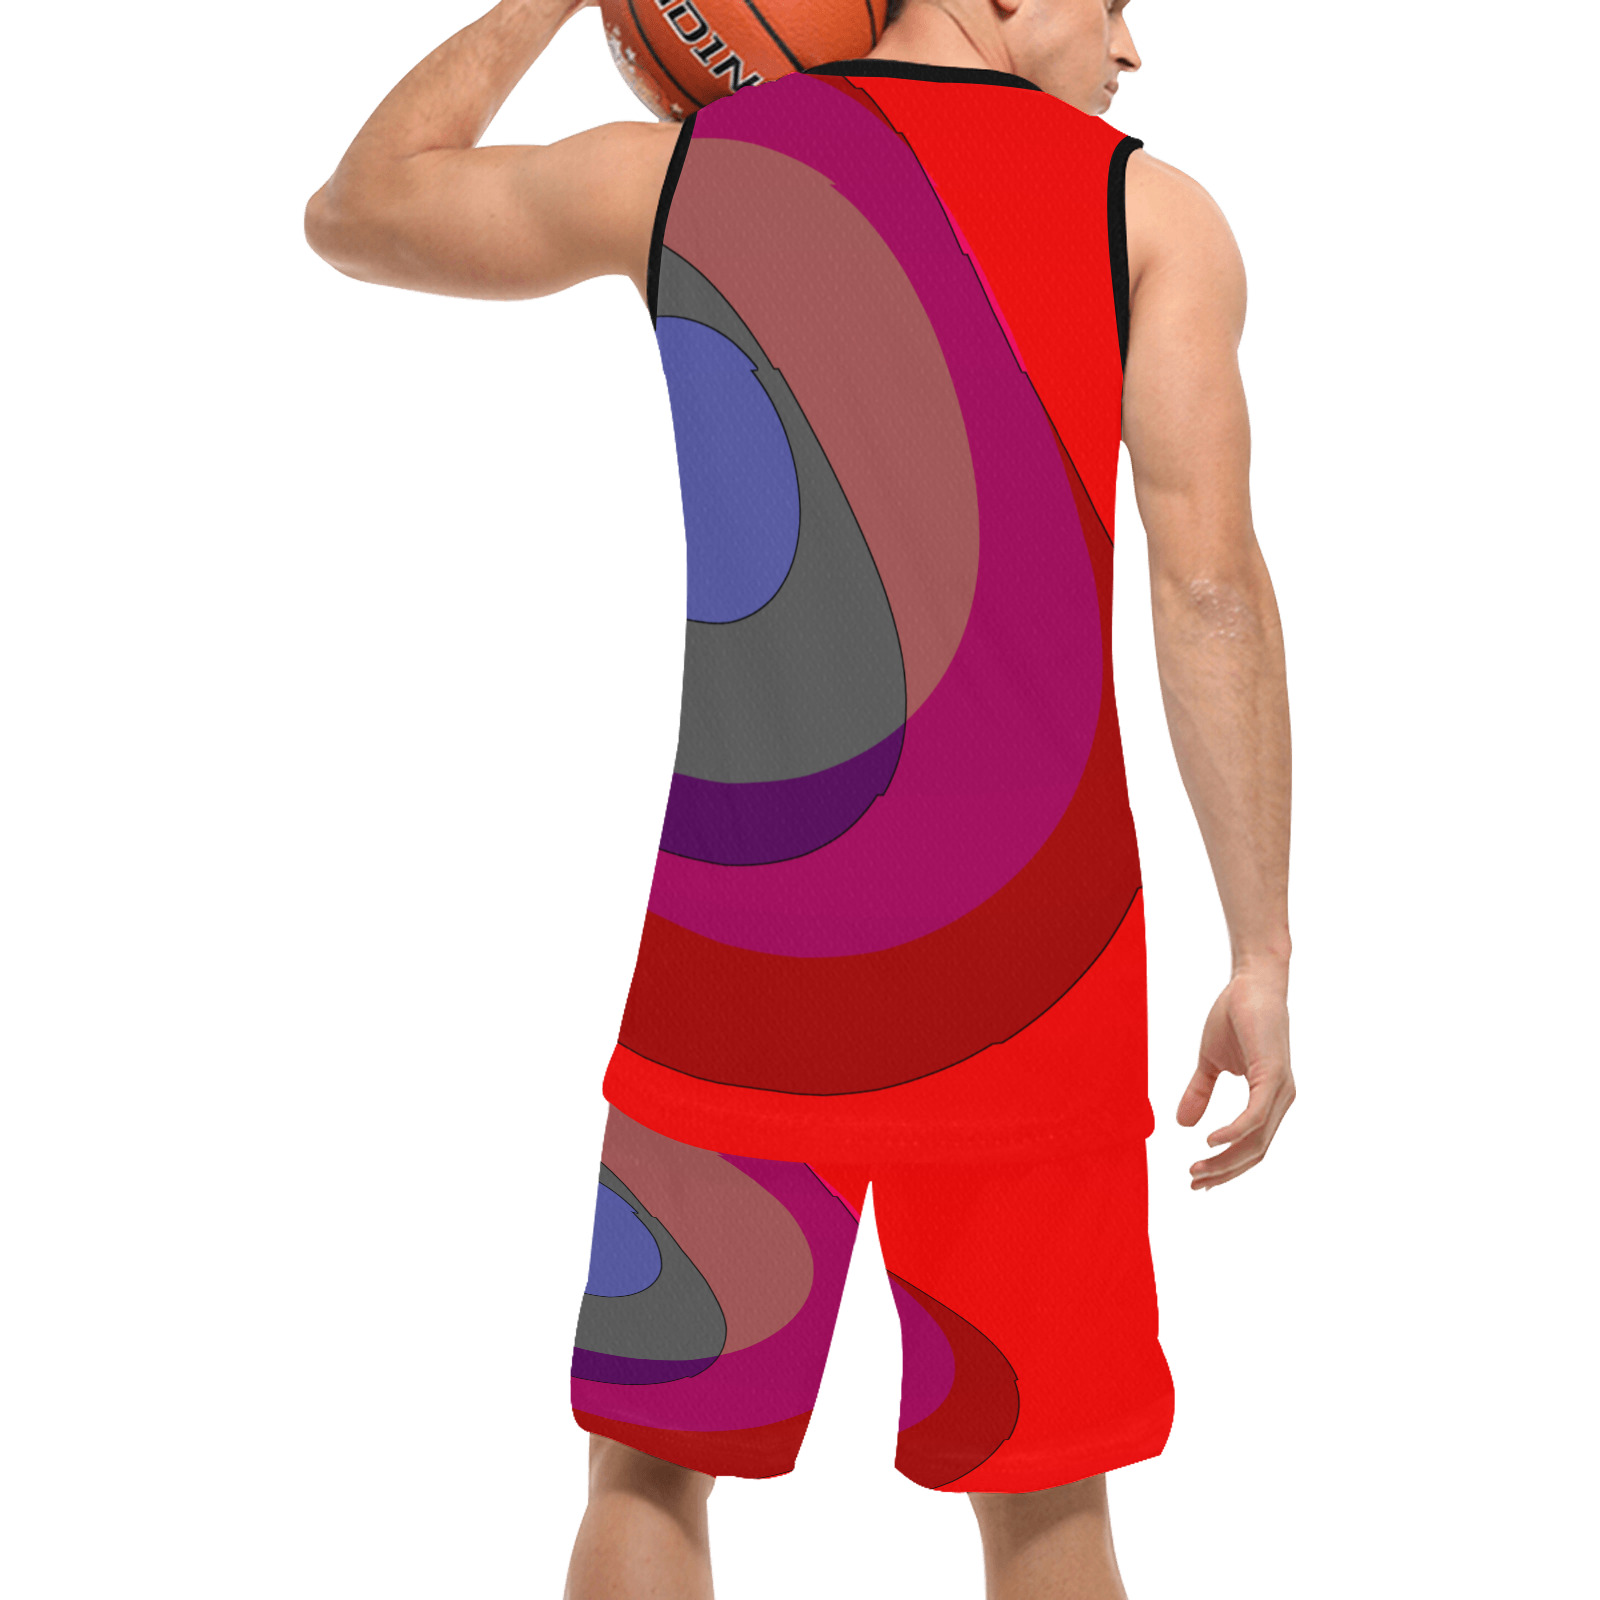 Red Abstract 714 Basketball Uniform with Pocket